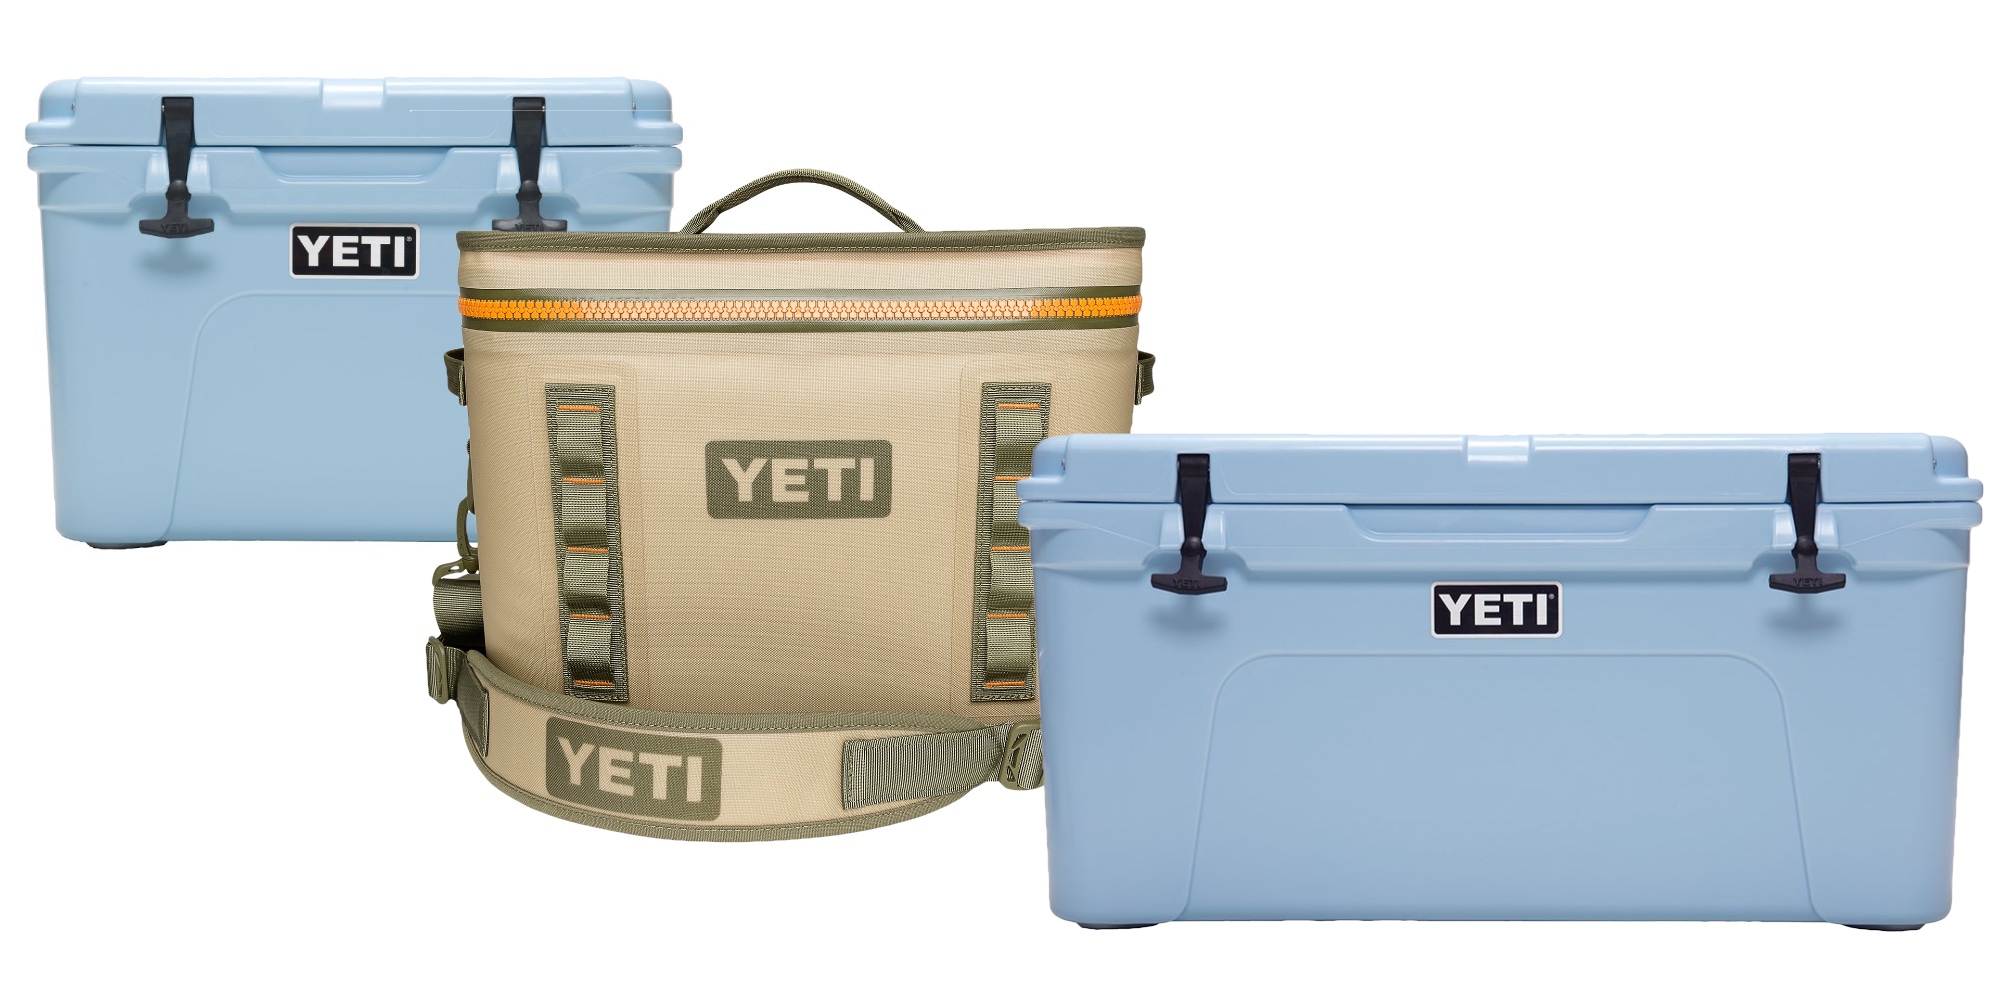 https://9to5toys.com/wp-content/uploads/sites/5/2019/07/yeti-cooler-prime-day-sale.jpg